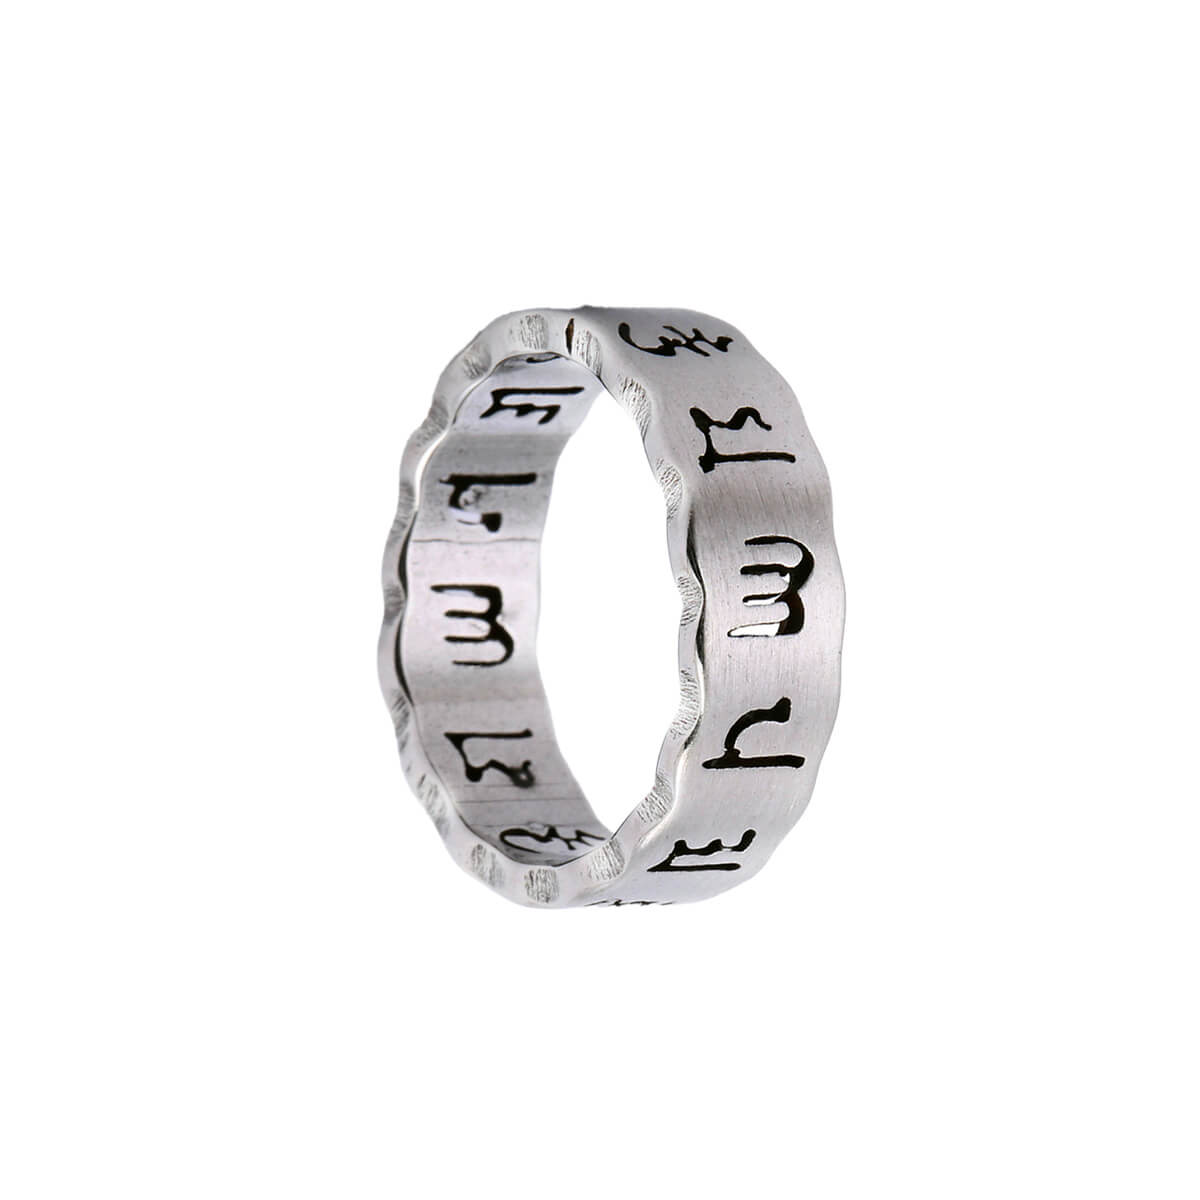 Textured brushed steel ring 6mm (steel 316L)